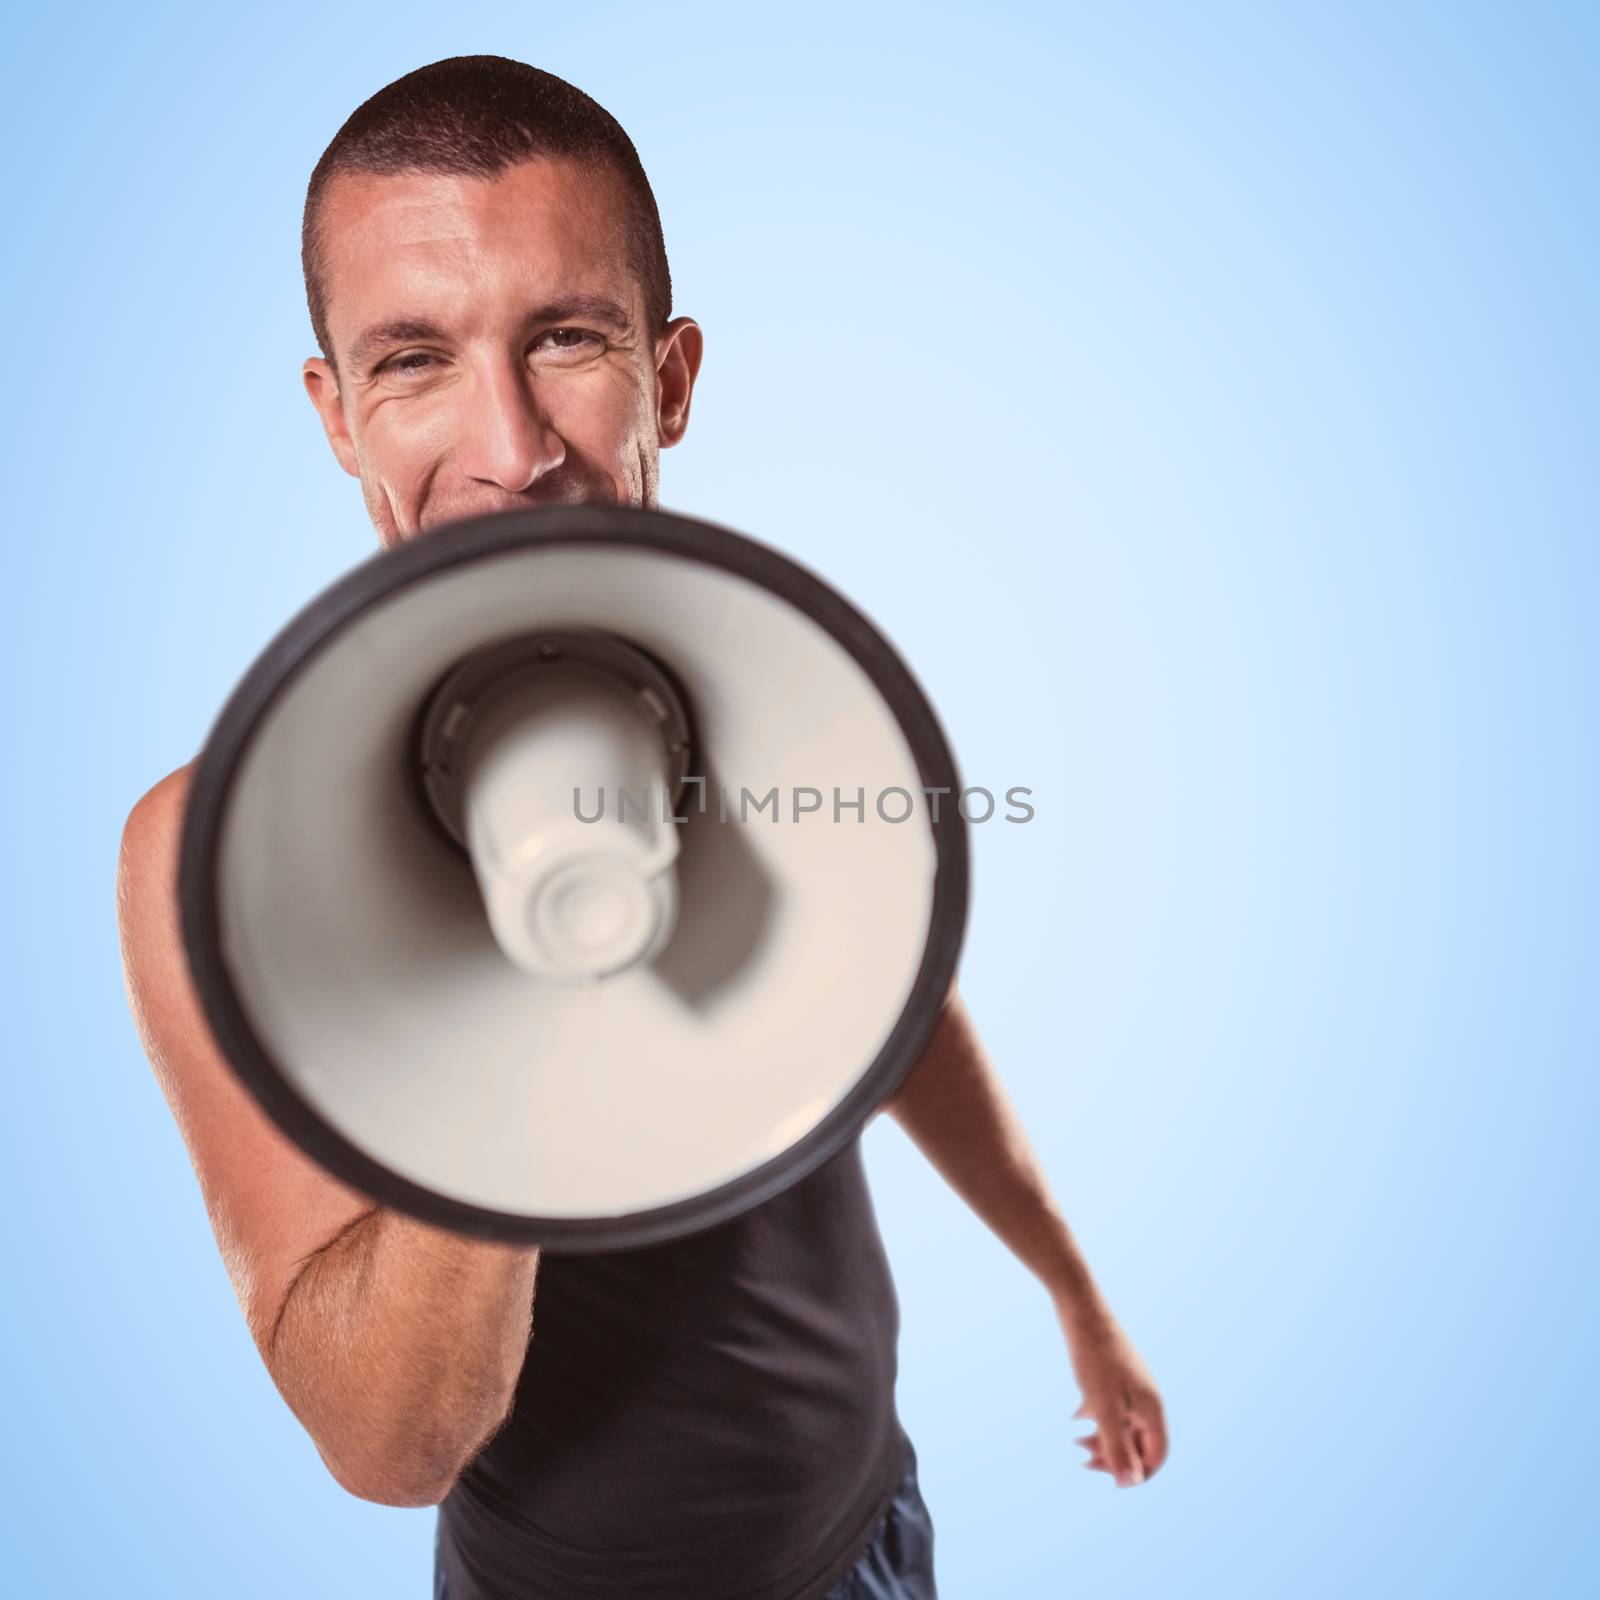 Male trainer yelling through megaphone against blue background